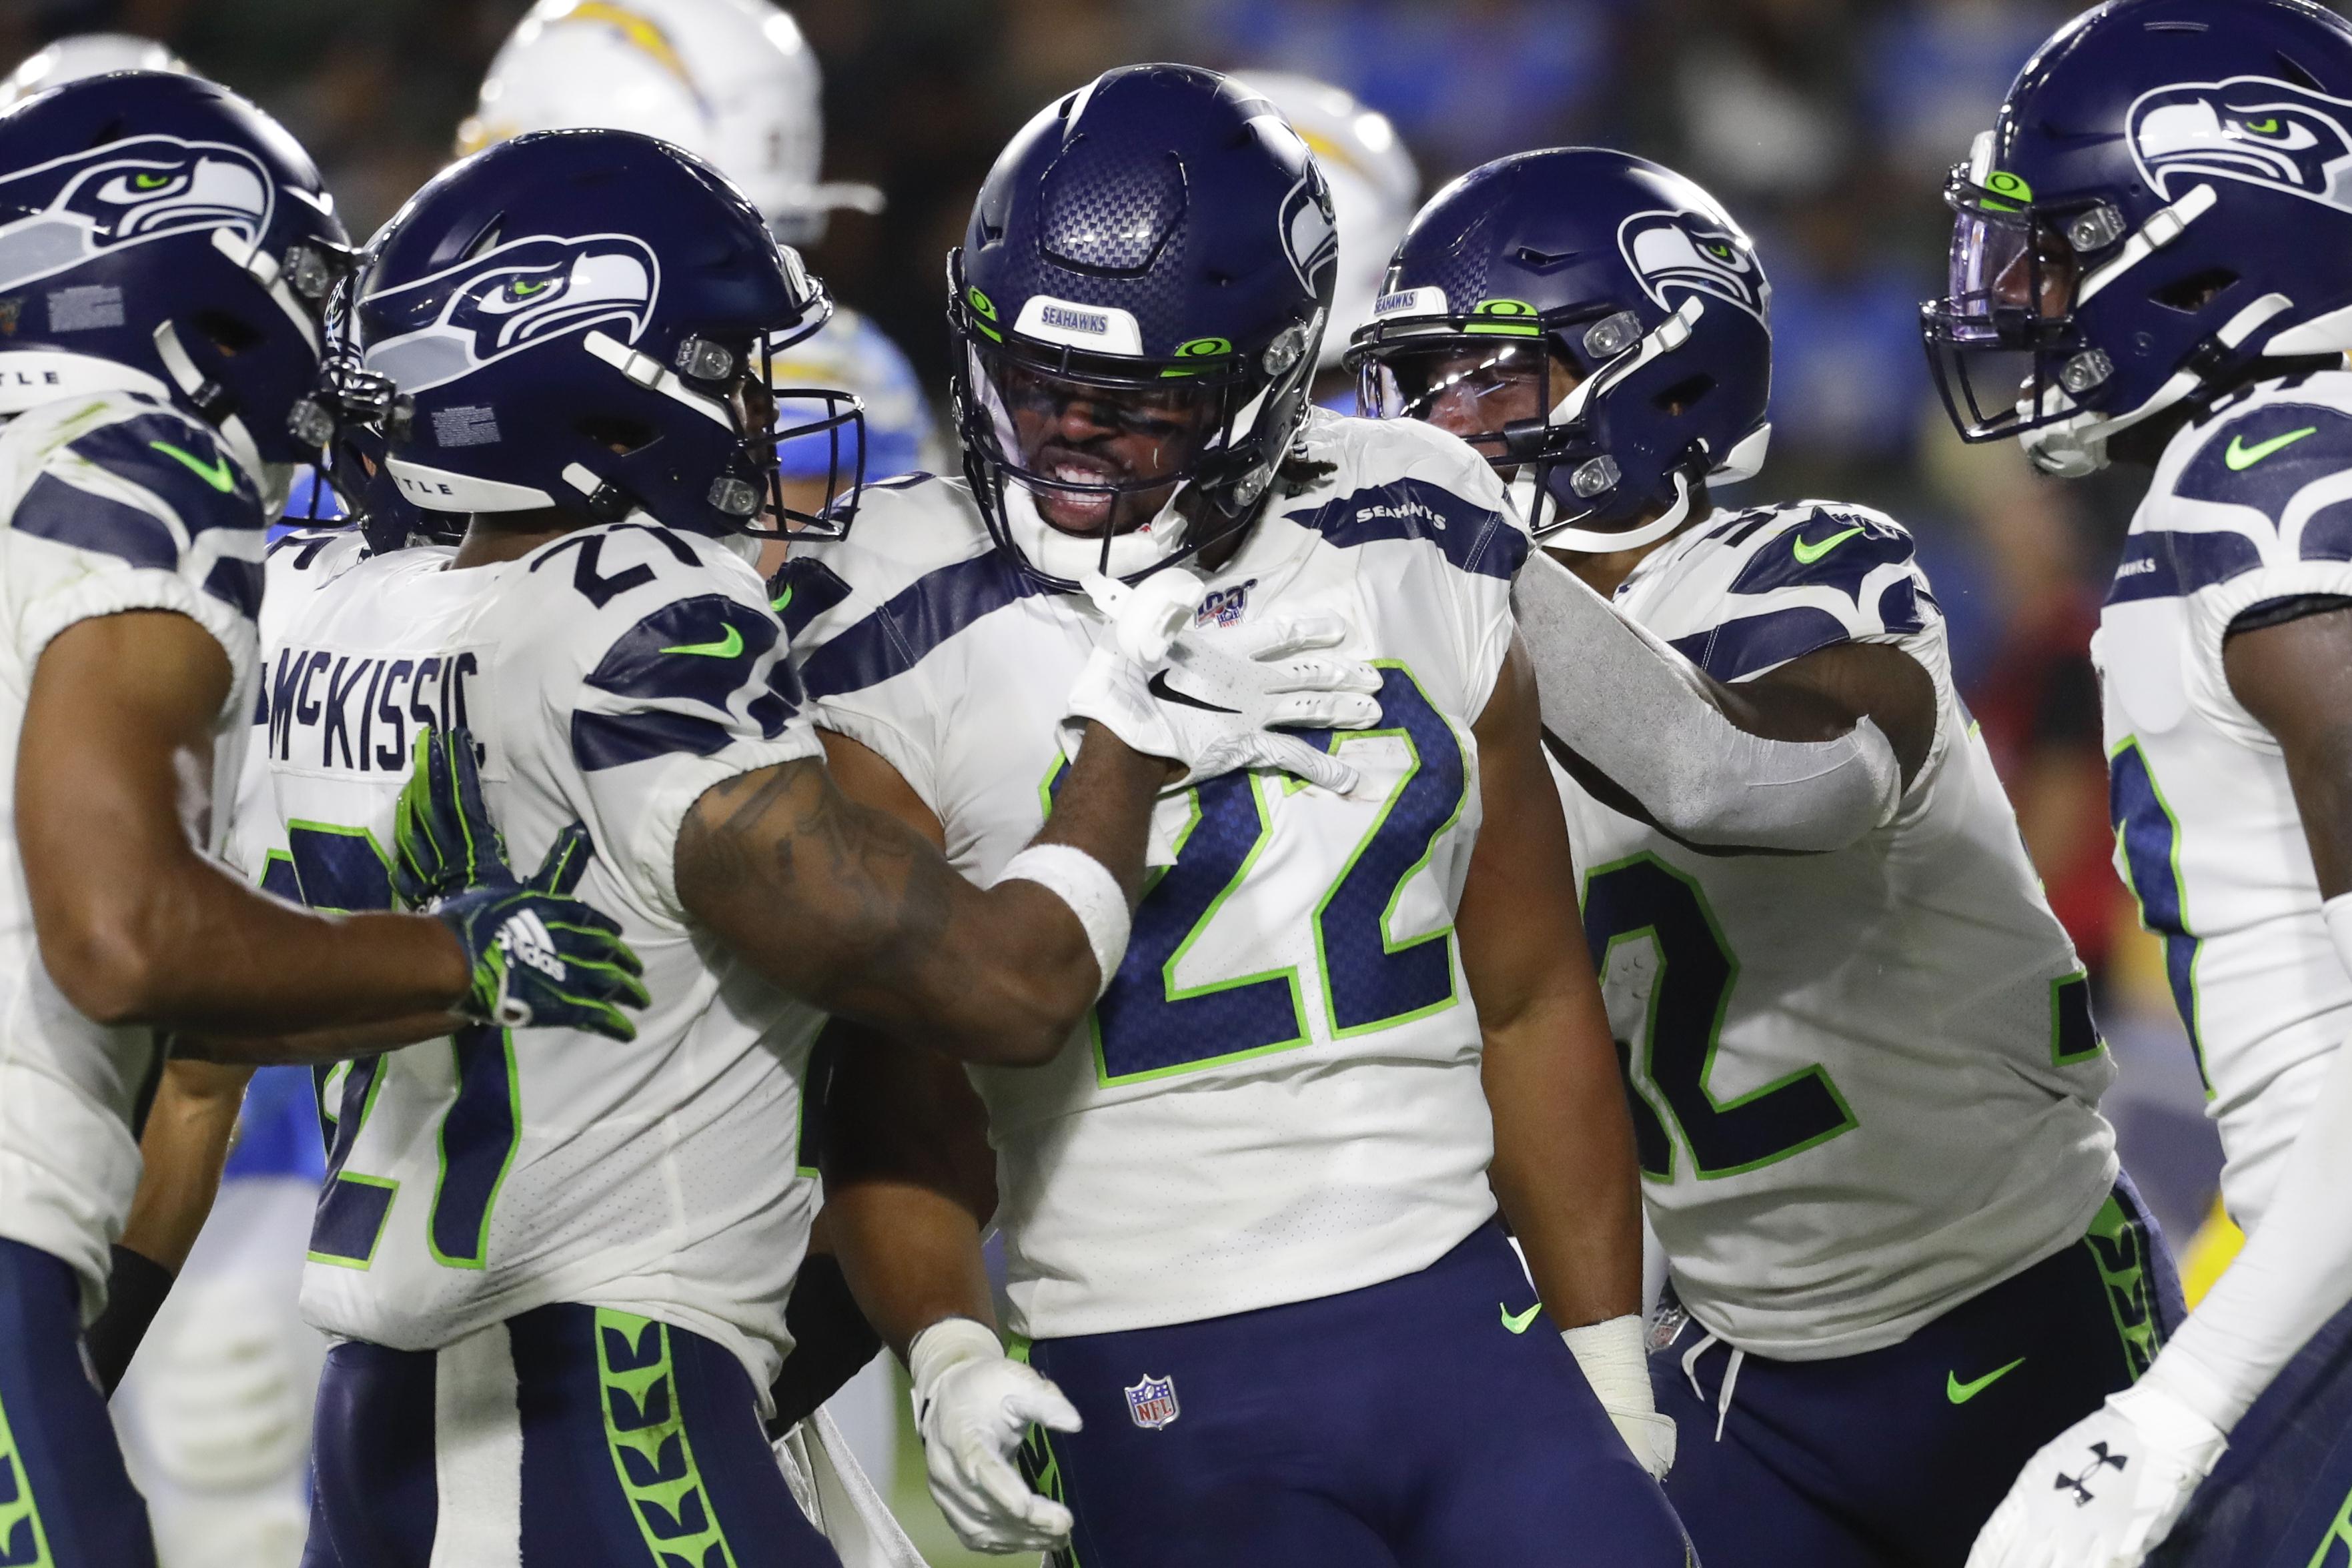 Seattle Seahawks Official Depth Chart